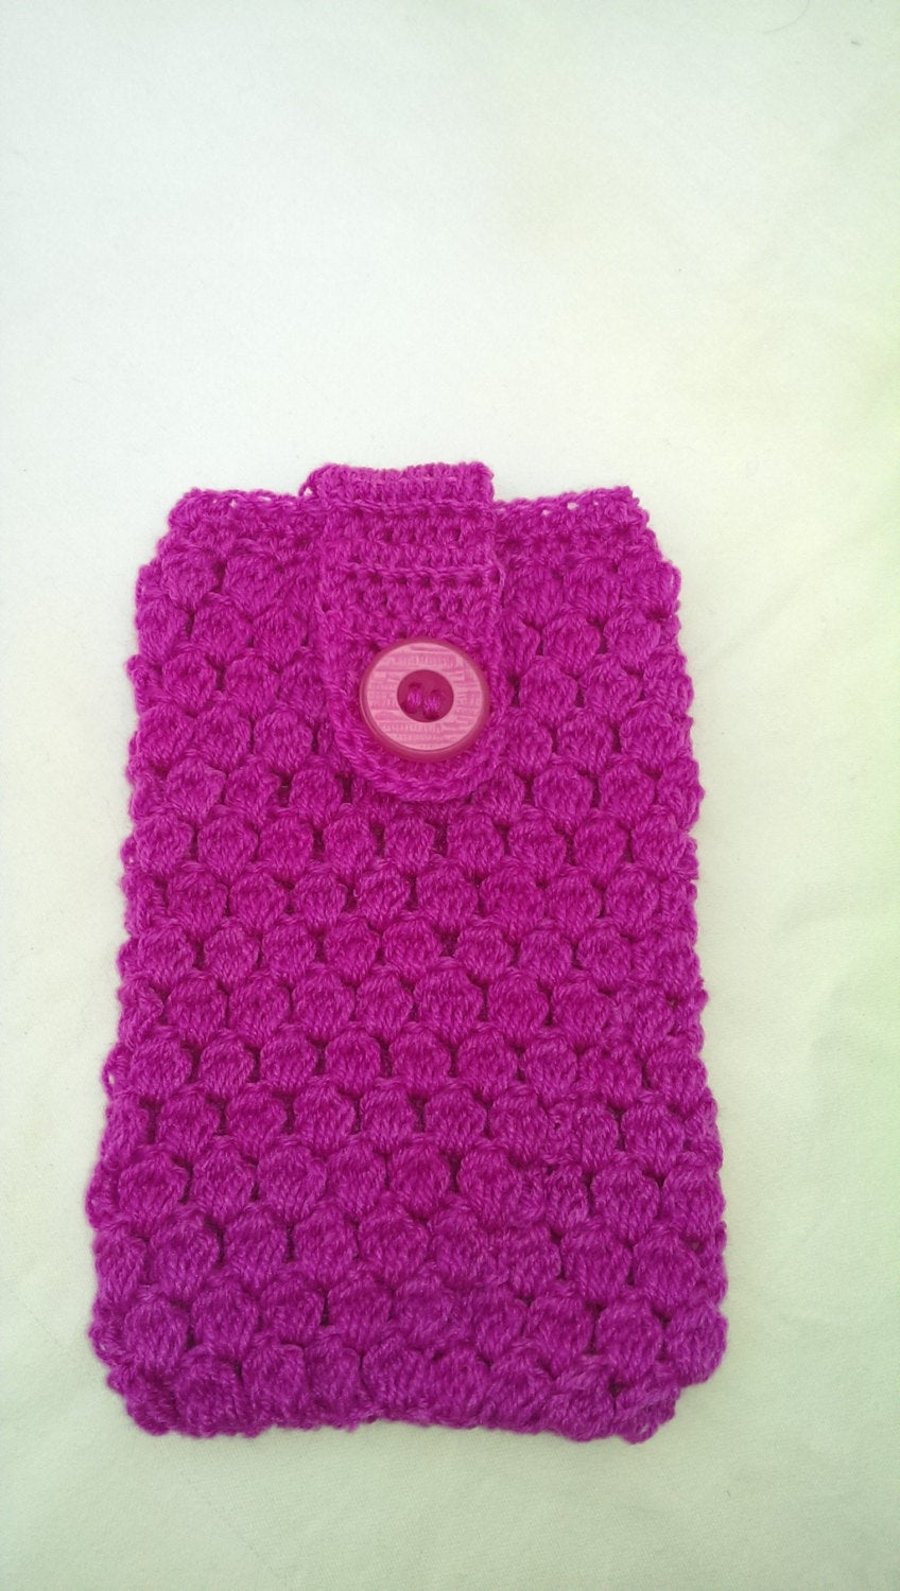 Pink 7" Tablet Kindle Fire Cover Cozy